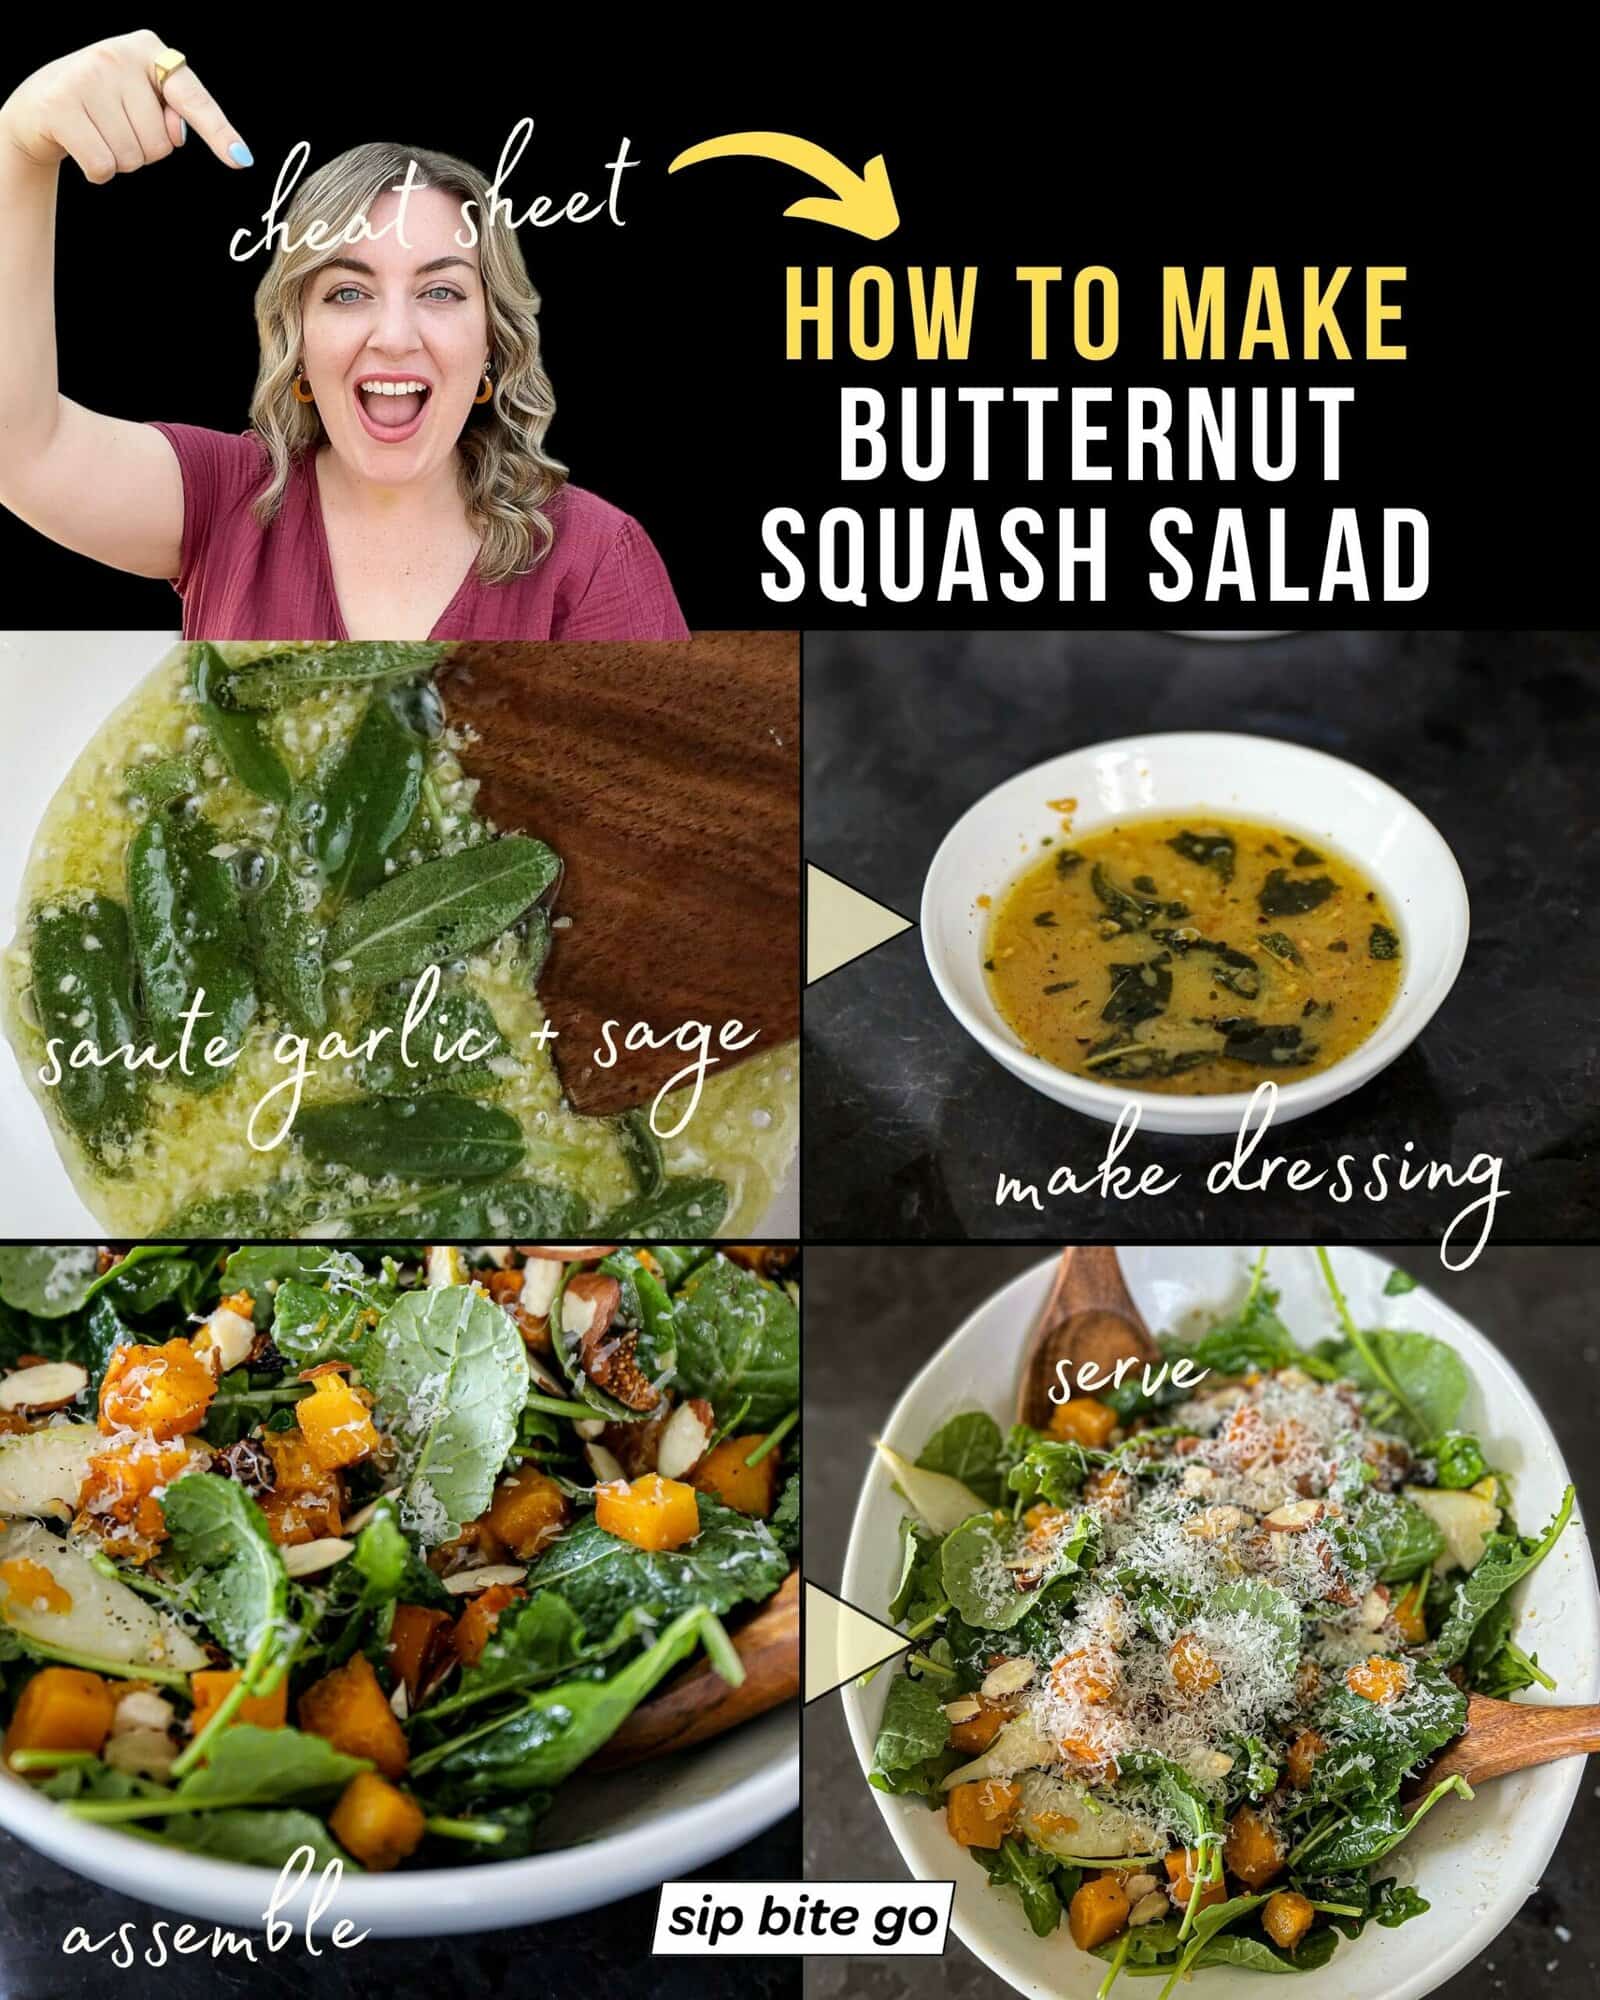 Infographic with steps and captions demonstrating how to make butternut squash salad